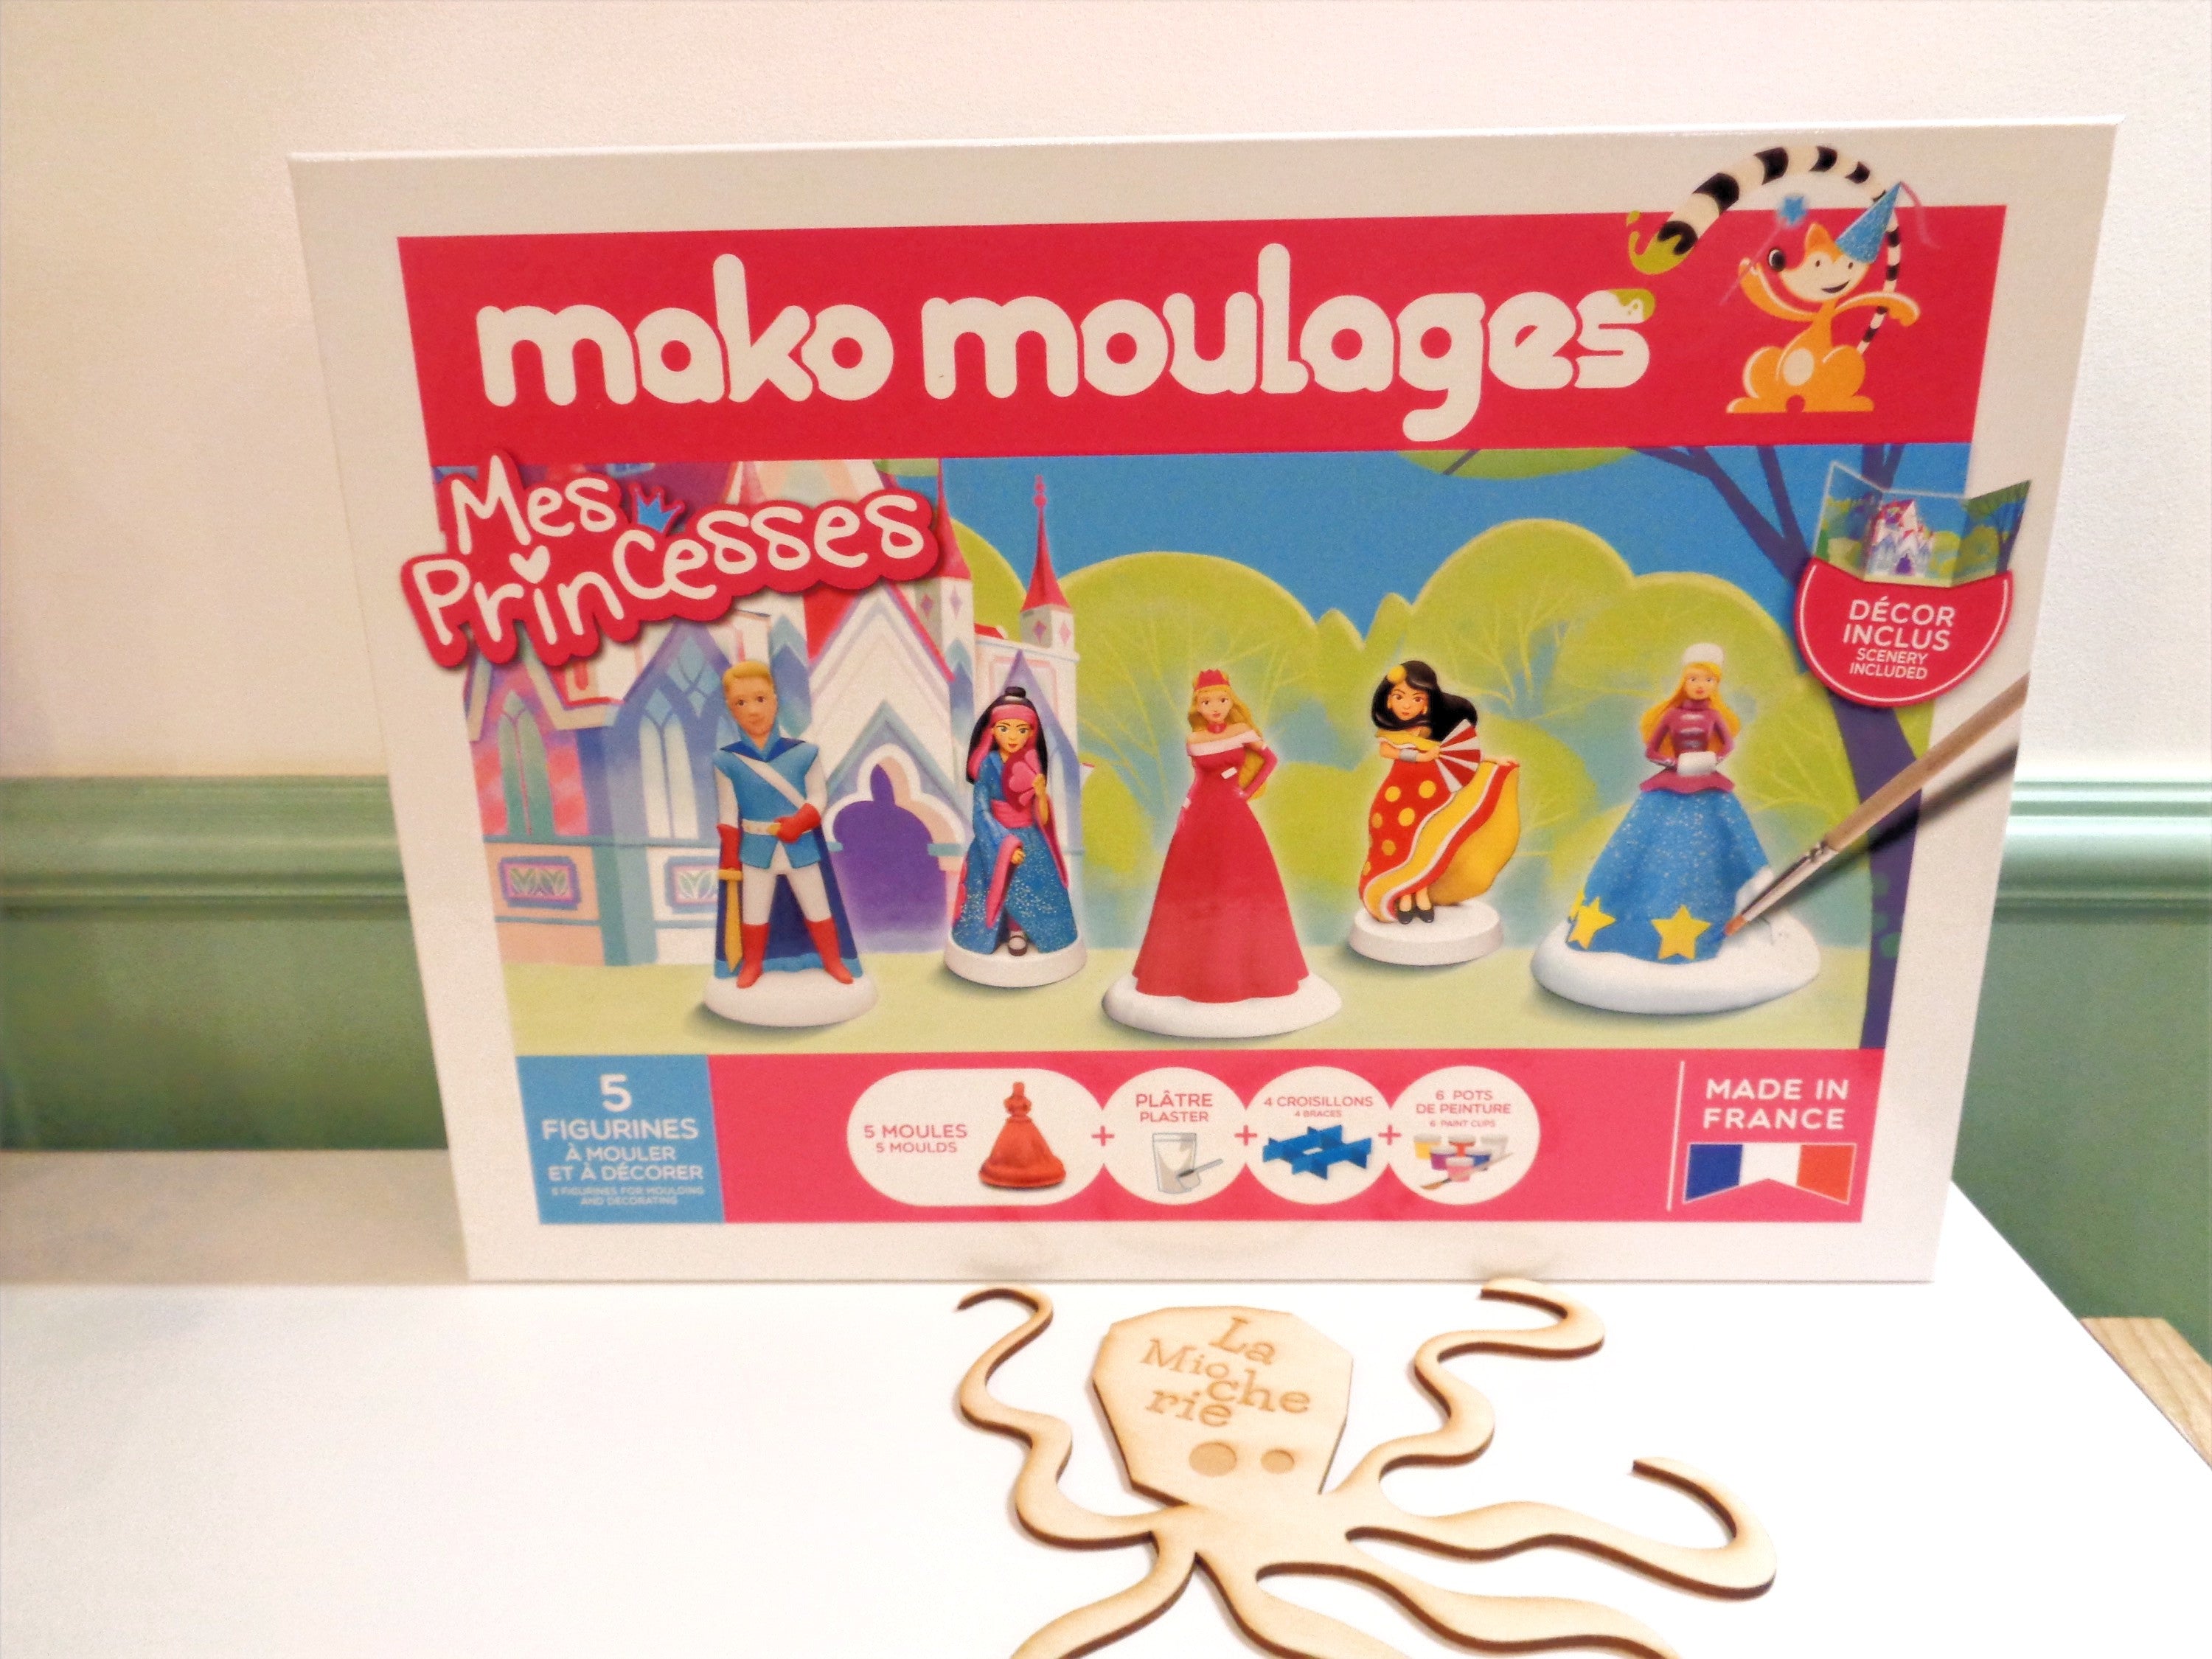 Grand coffret Mes Princesses - Made in France - Mako Moulages